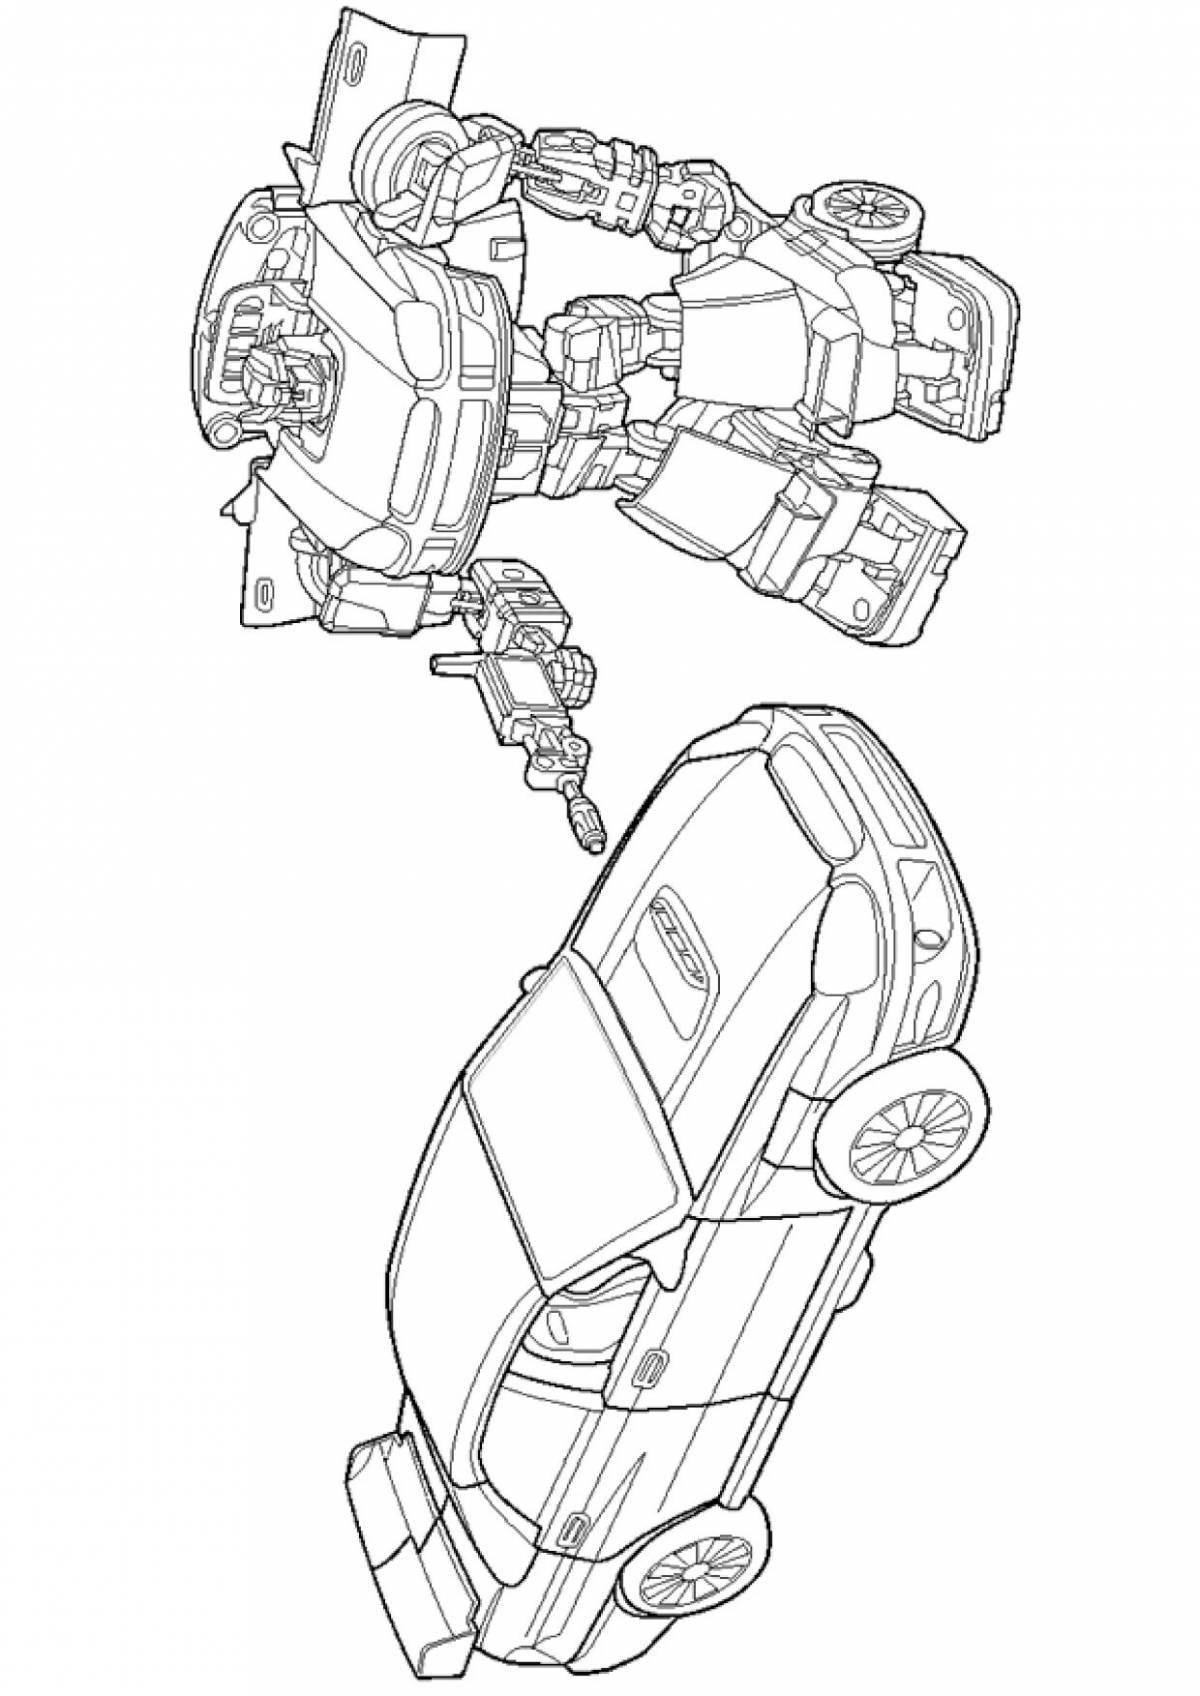 Coloring page adorable galactic robots